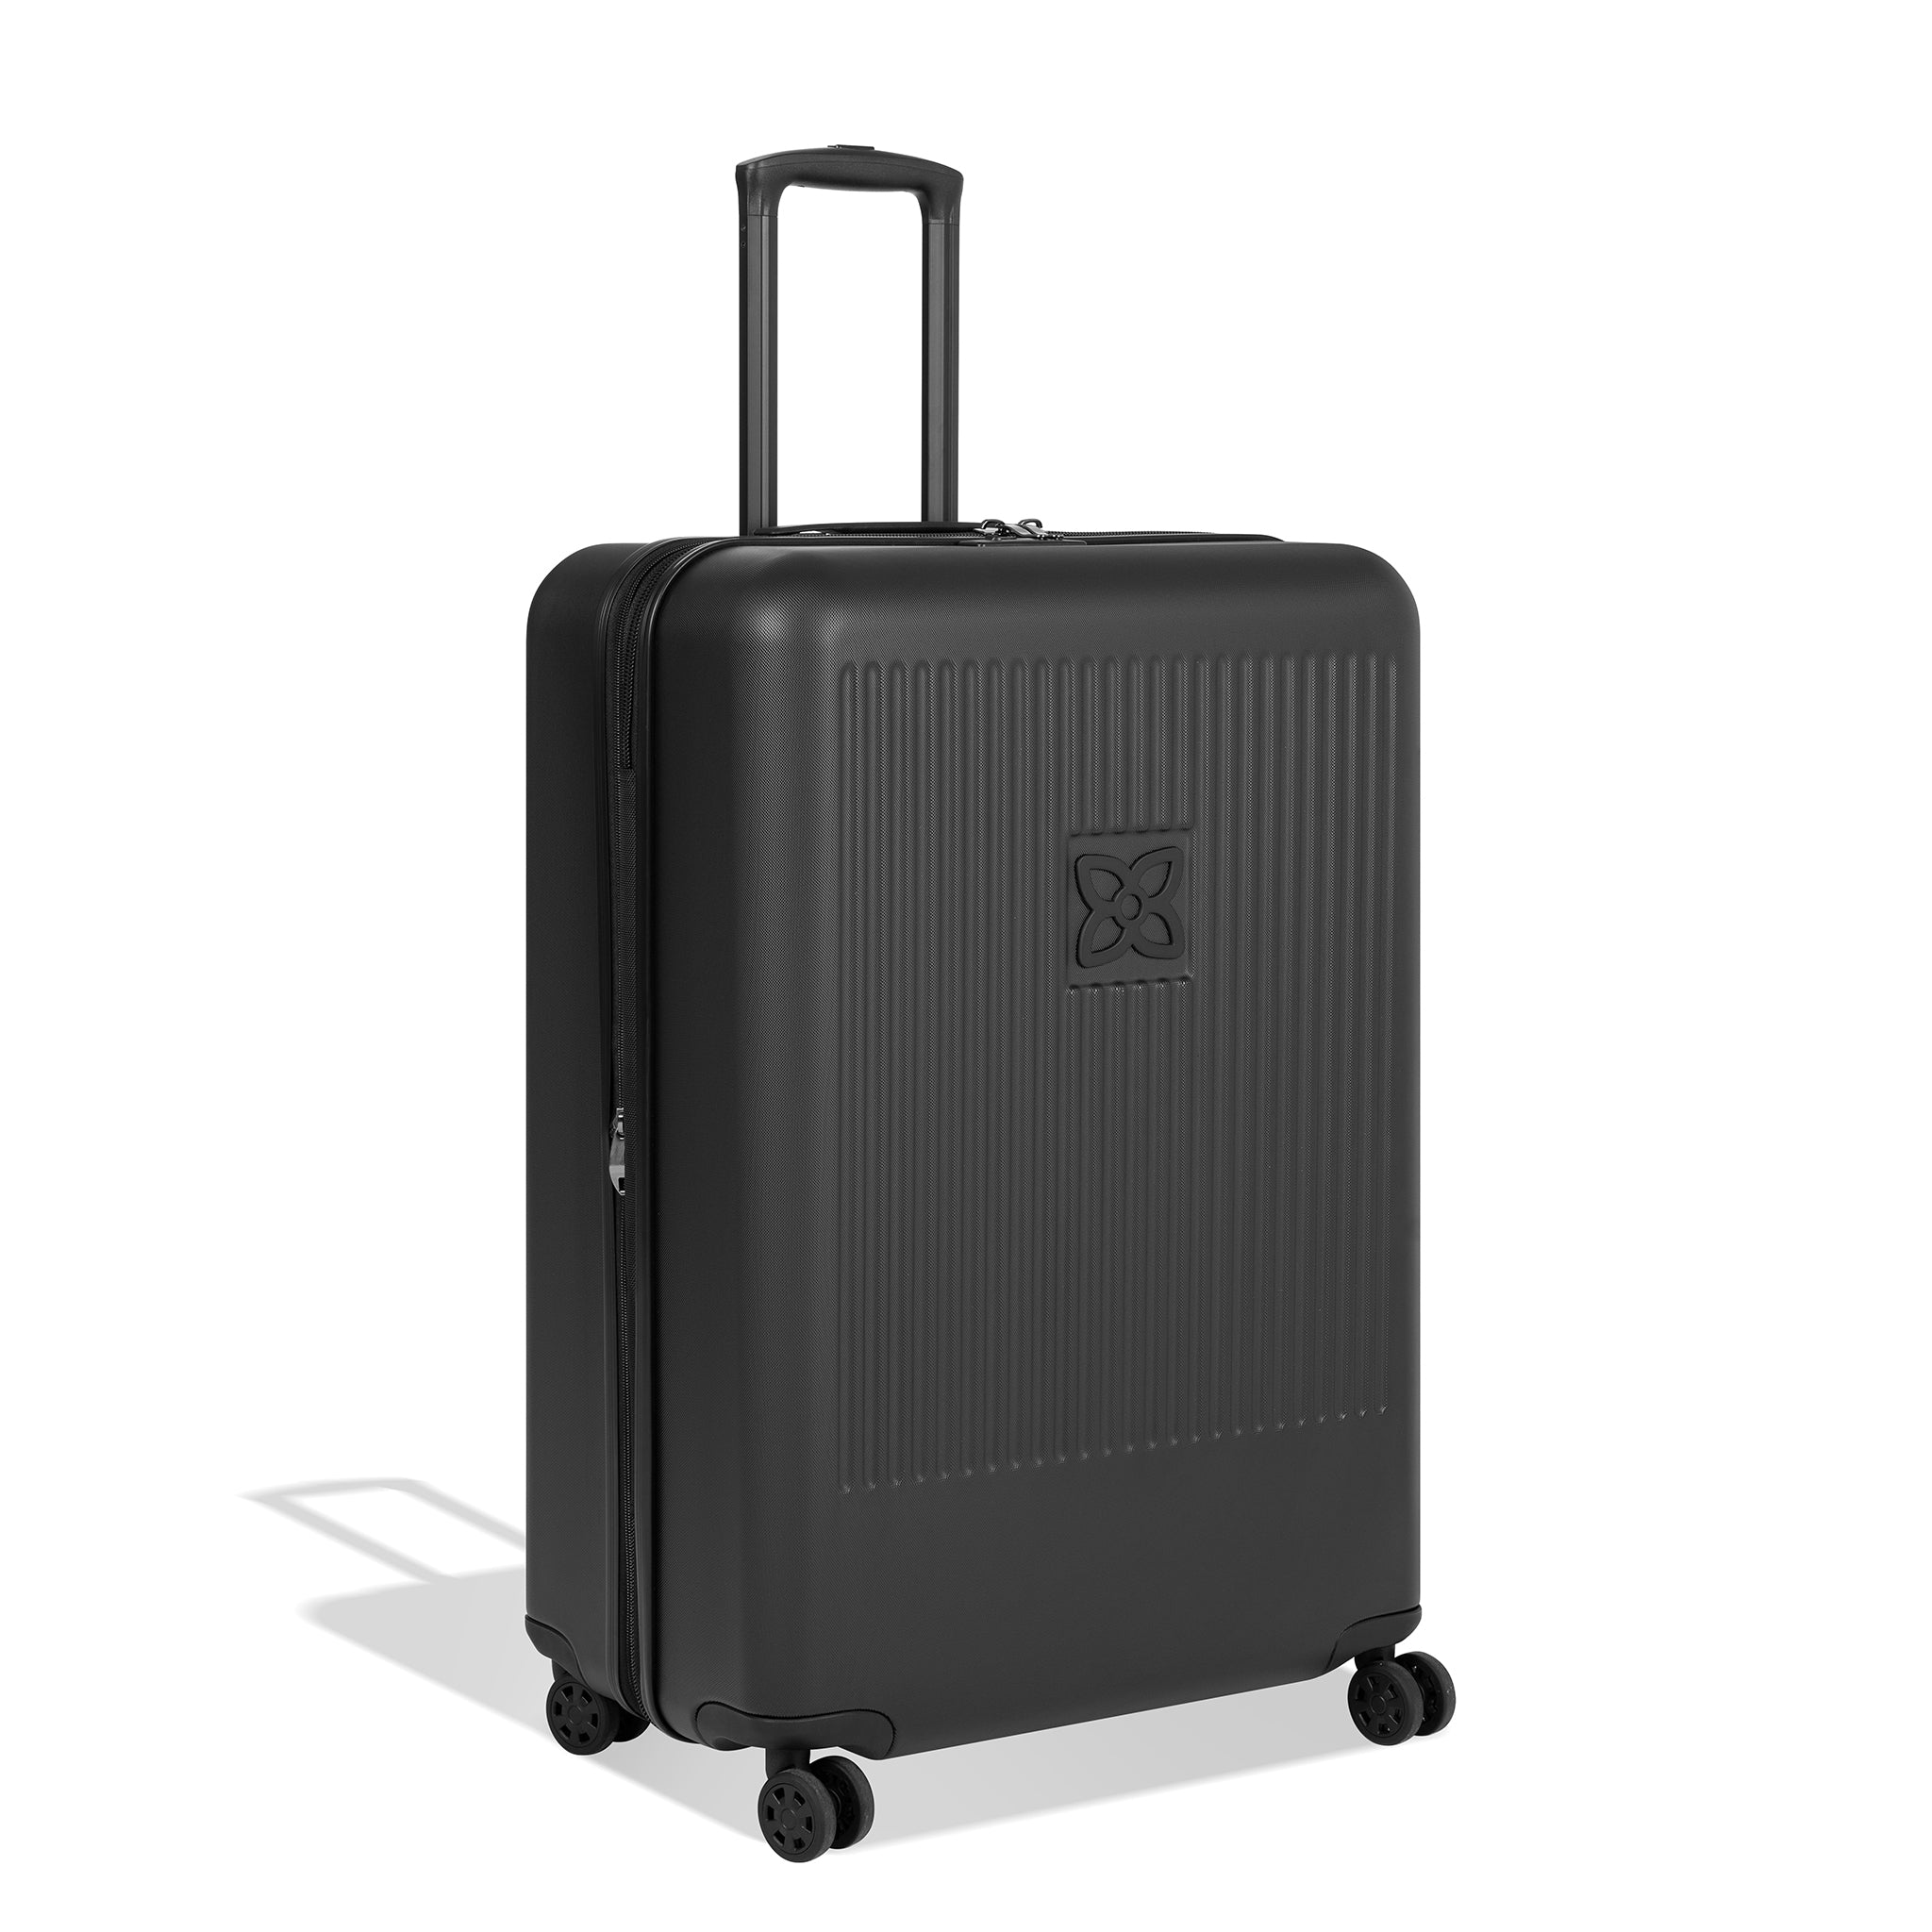 Angled front view of Sherpani hard-shell checked luggage, the Meridian in Black. Meridian features include a retractable luggage handle, uncrushable exterior, TSA-approved locking zippers and four 36-degree spinner wheels. #color_black